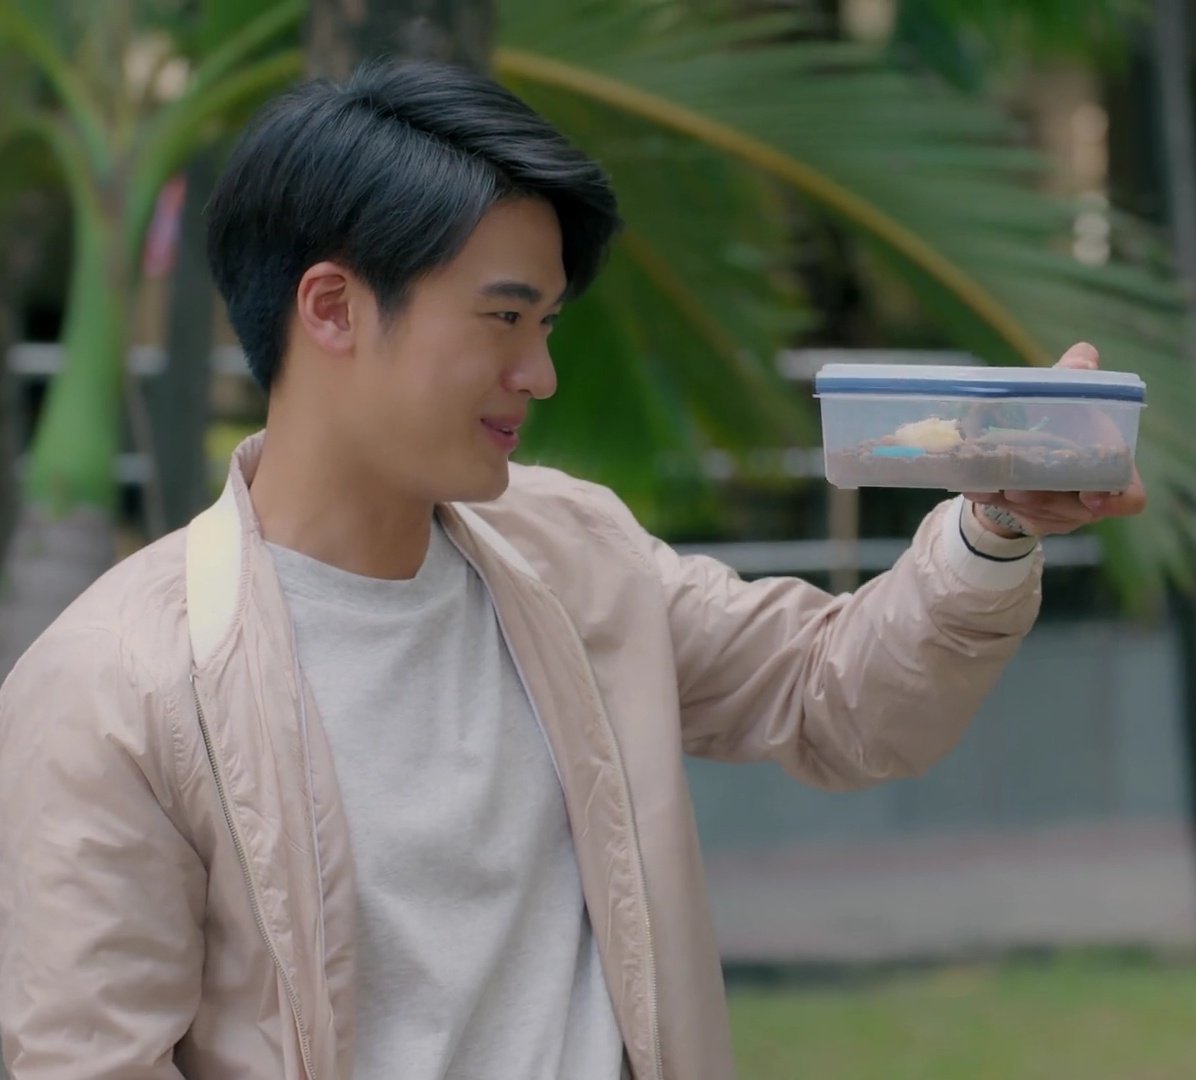  #MDNutthapong: His love and obsession with Nature makes him that much more Sexy, just like Dr.Thara!!  #TharaFrong  #MyEngineerEP12  #myengineerมีช็อปมีเกียร์มีเมียรึยังวะ  #theseriesmyengineer